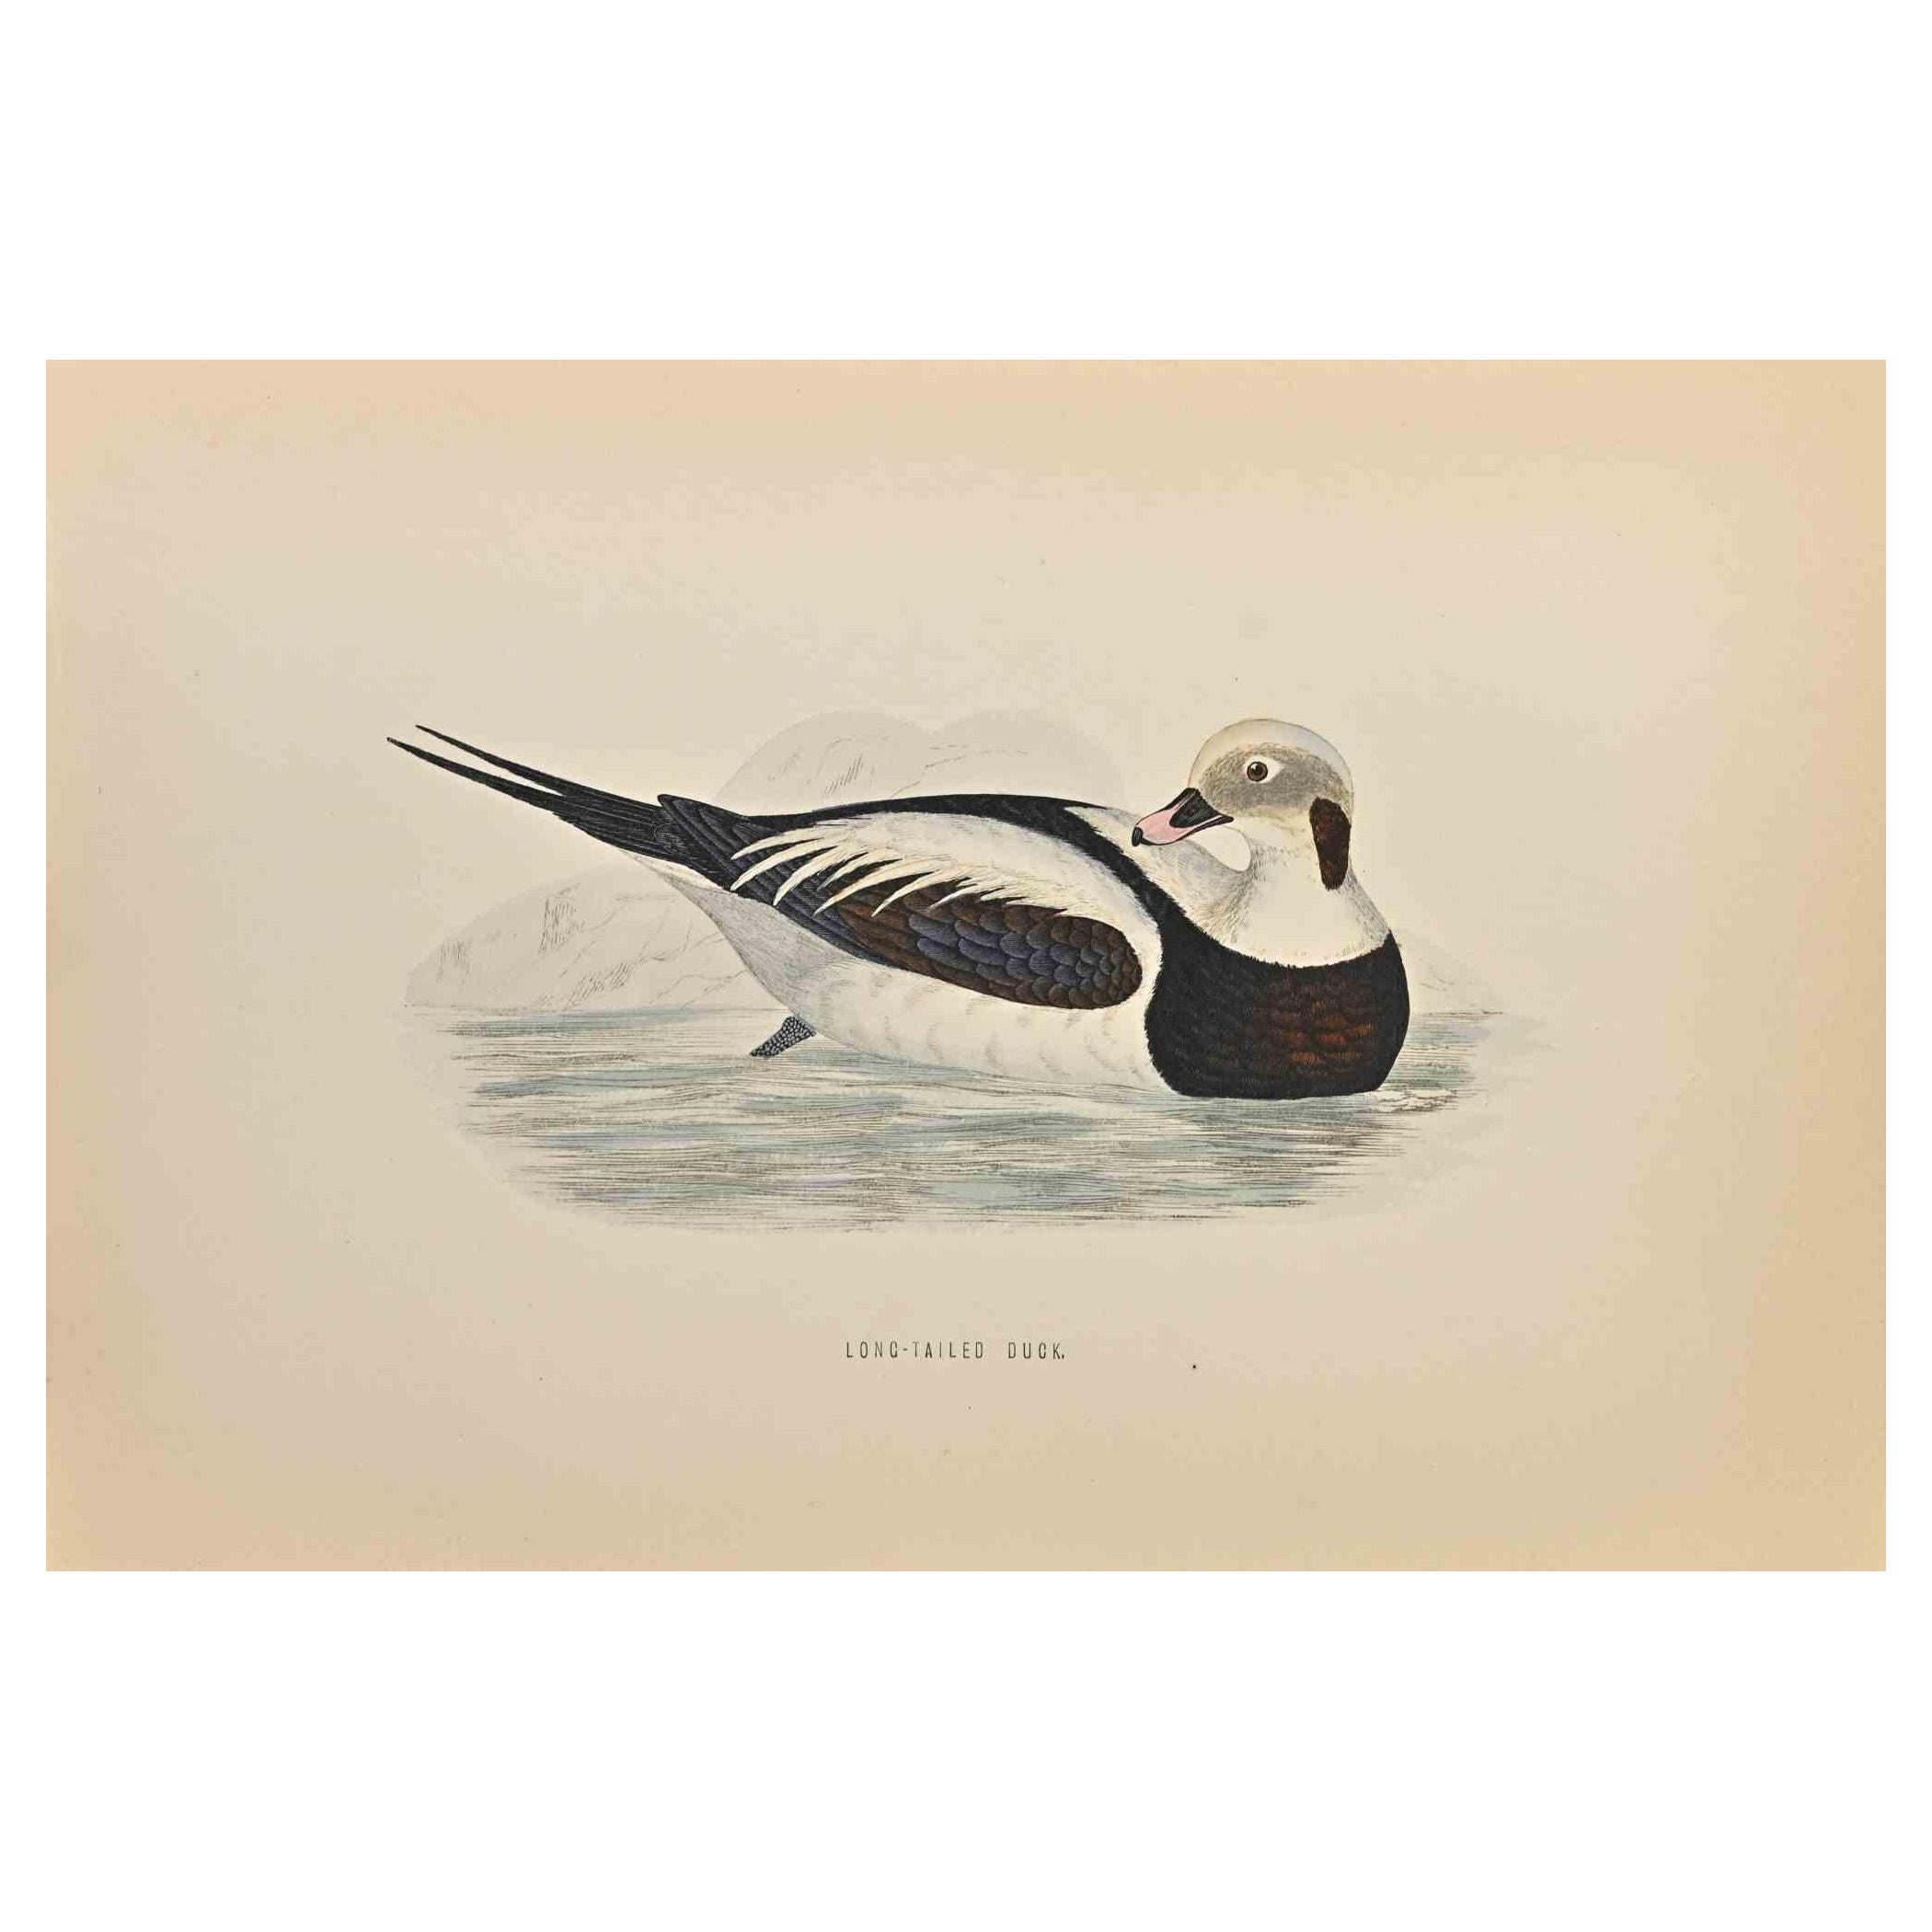 Long-Tailed Duck is a modern artwork realized in 1870 by the British artist Alexander Francis Lydon (1836-1917) . 

Woodcut print, hand colored, published by London, Bell & Sons, 1870.  Name of the bird printed in plate. This work is part of a print